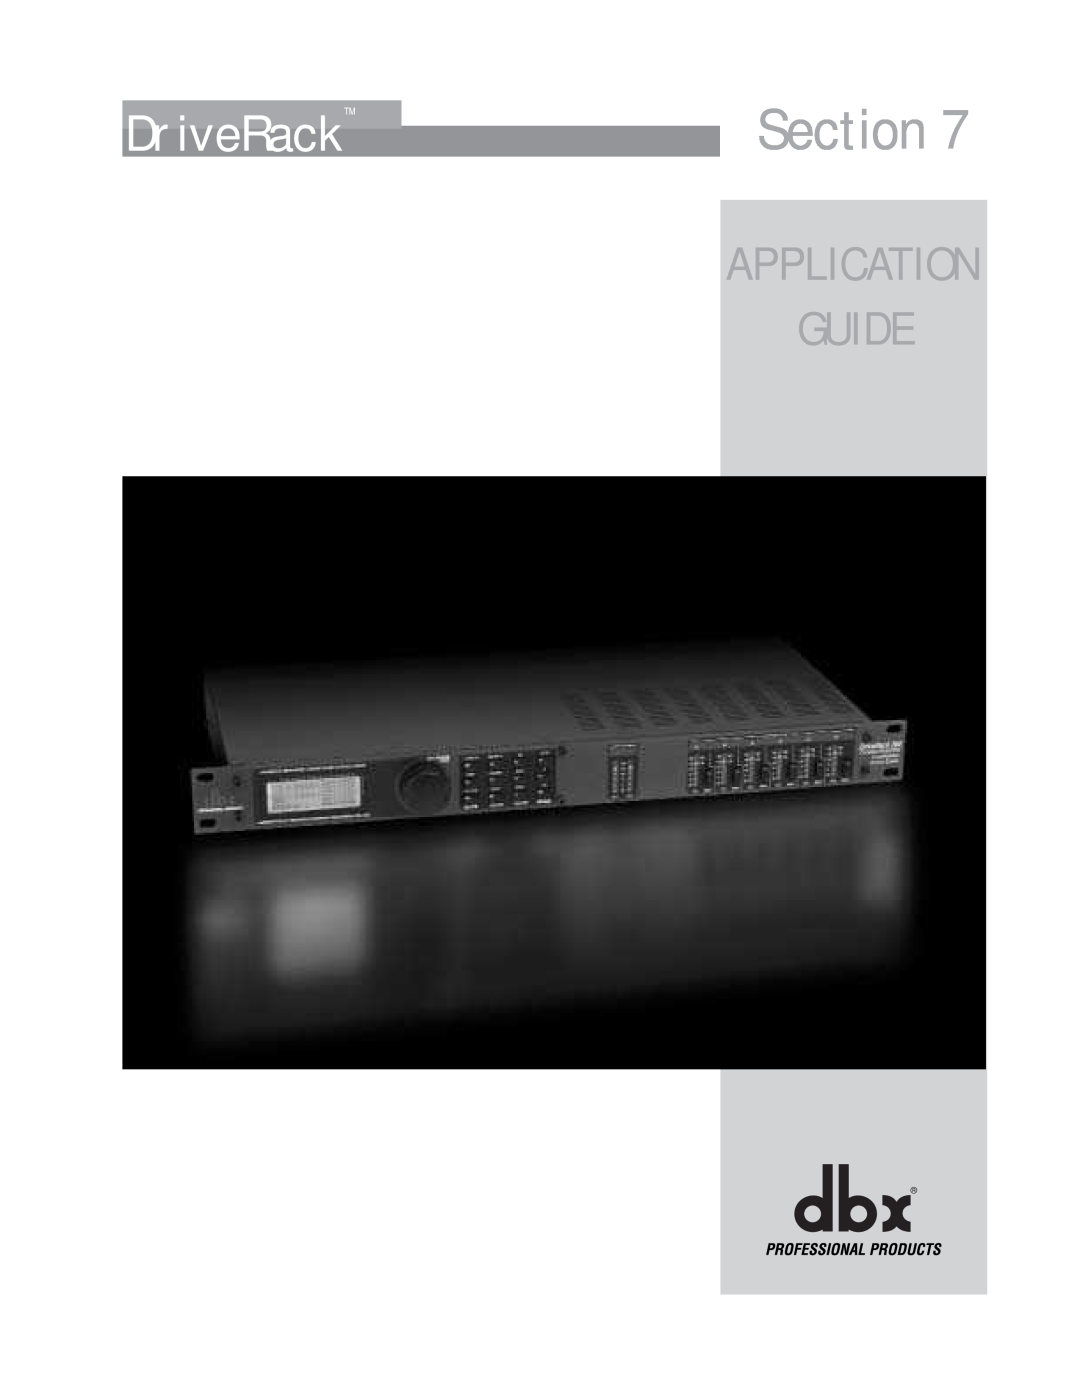 dbx Pro 260 user manual Guide, Section, DriveRack, Application 